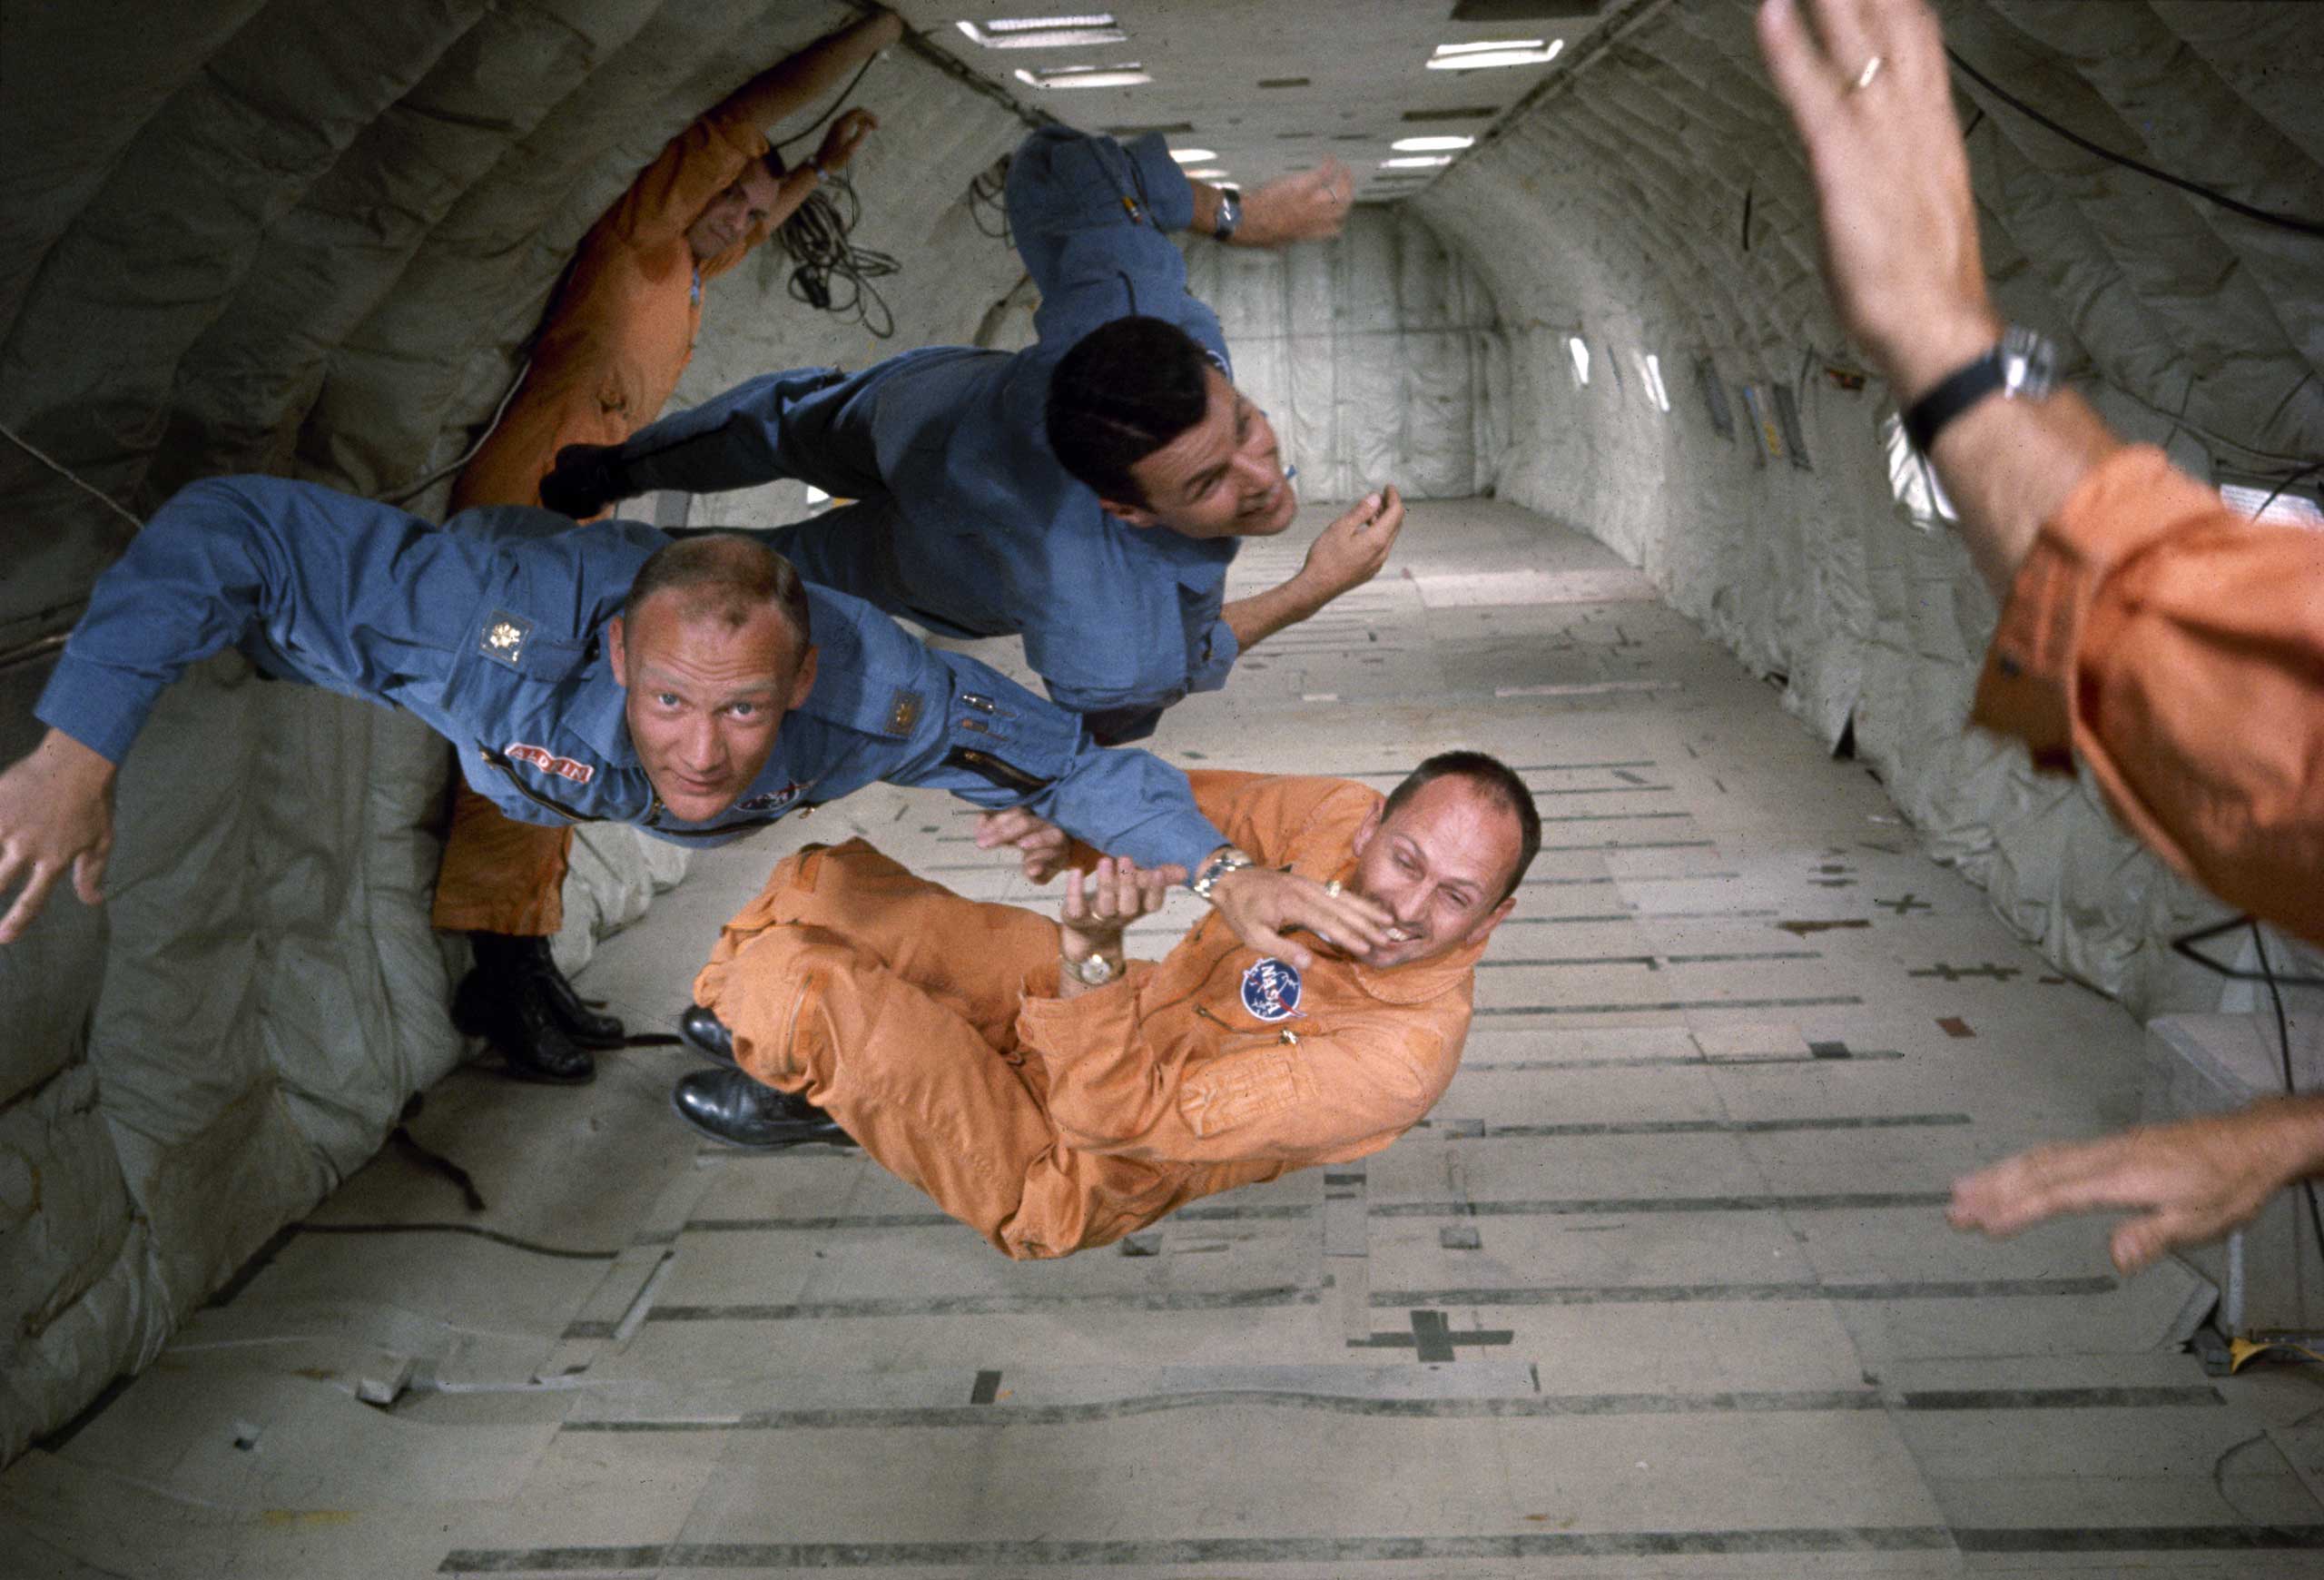 As part of their NASA mission training for Gemini 12 Aldrin along with fellow astronauts Charles Bassett and Theodore Freeman trained underwater and in weightless environments to simulate space conditions.